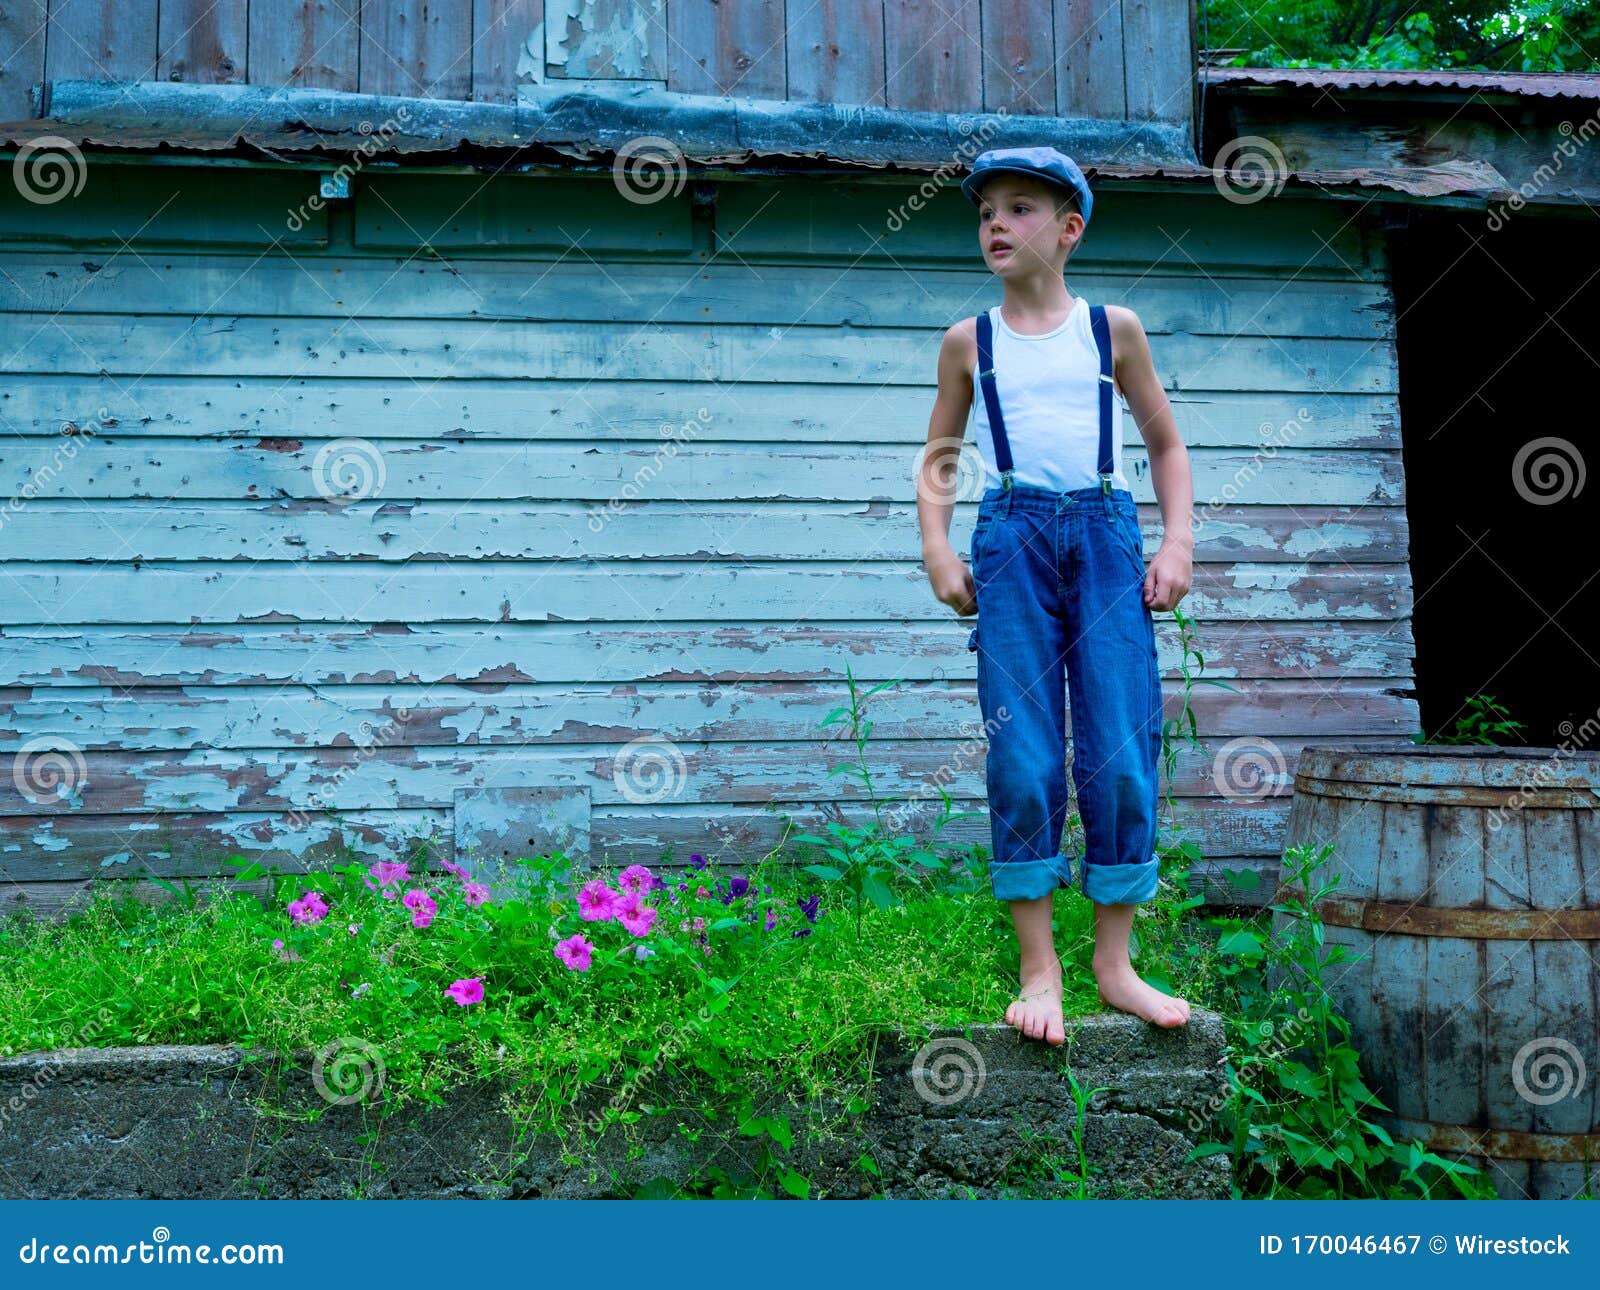 Little Boy with a Hat and Suspenders Standing on a Stone in a Garden